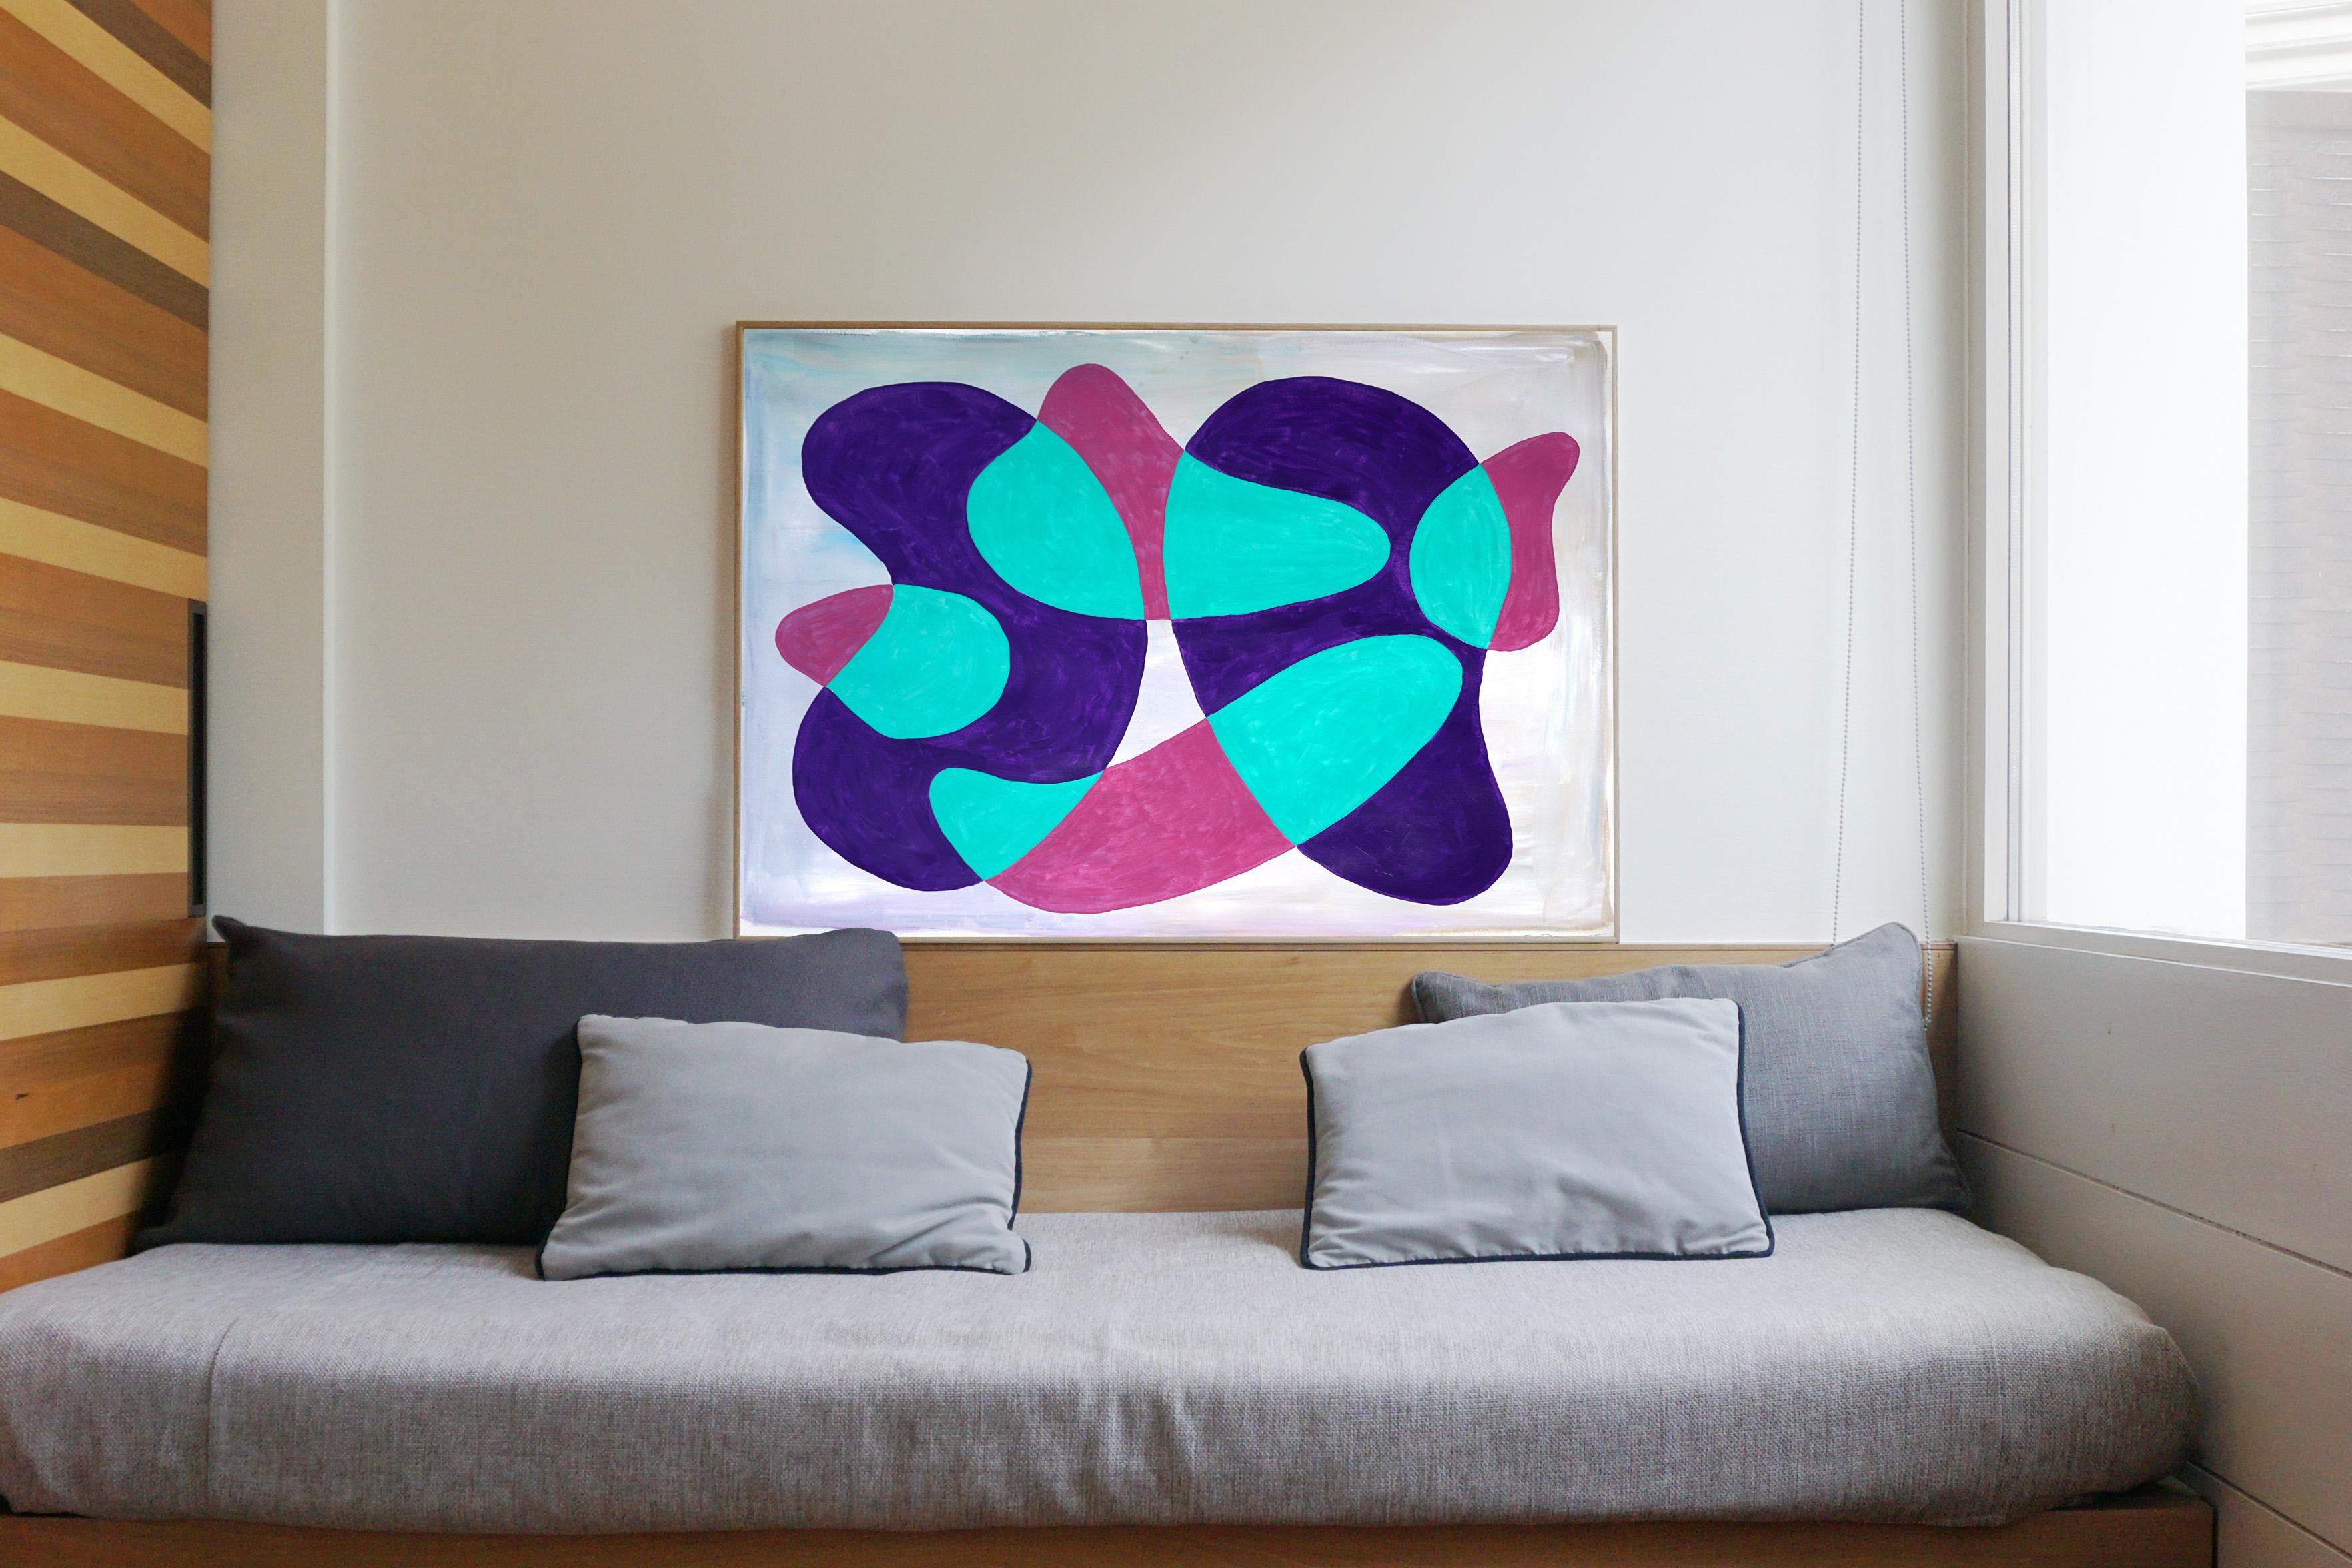 Translucent Teal Kidney Pools, Mid-Century Shapes and Layers in Cold Blue Tones - Abstract Geometric Painting by Ryan Rivadeneyra